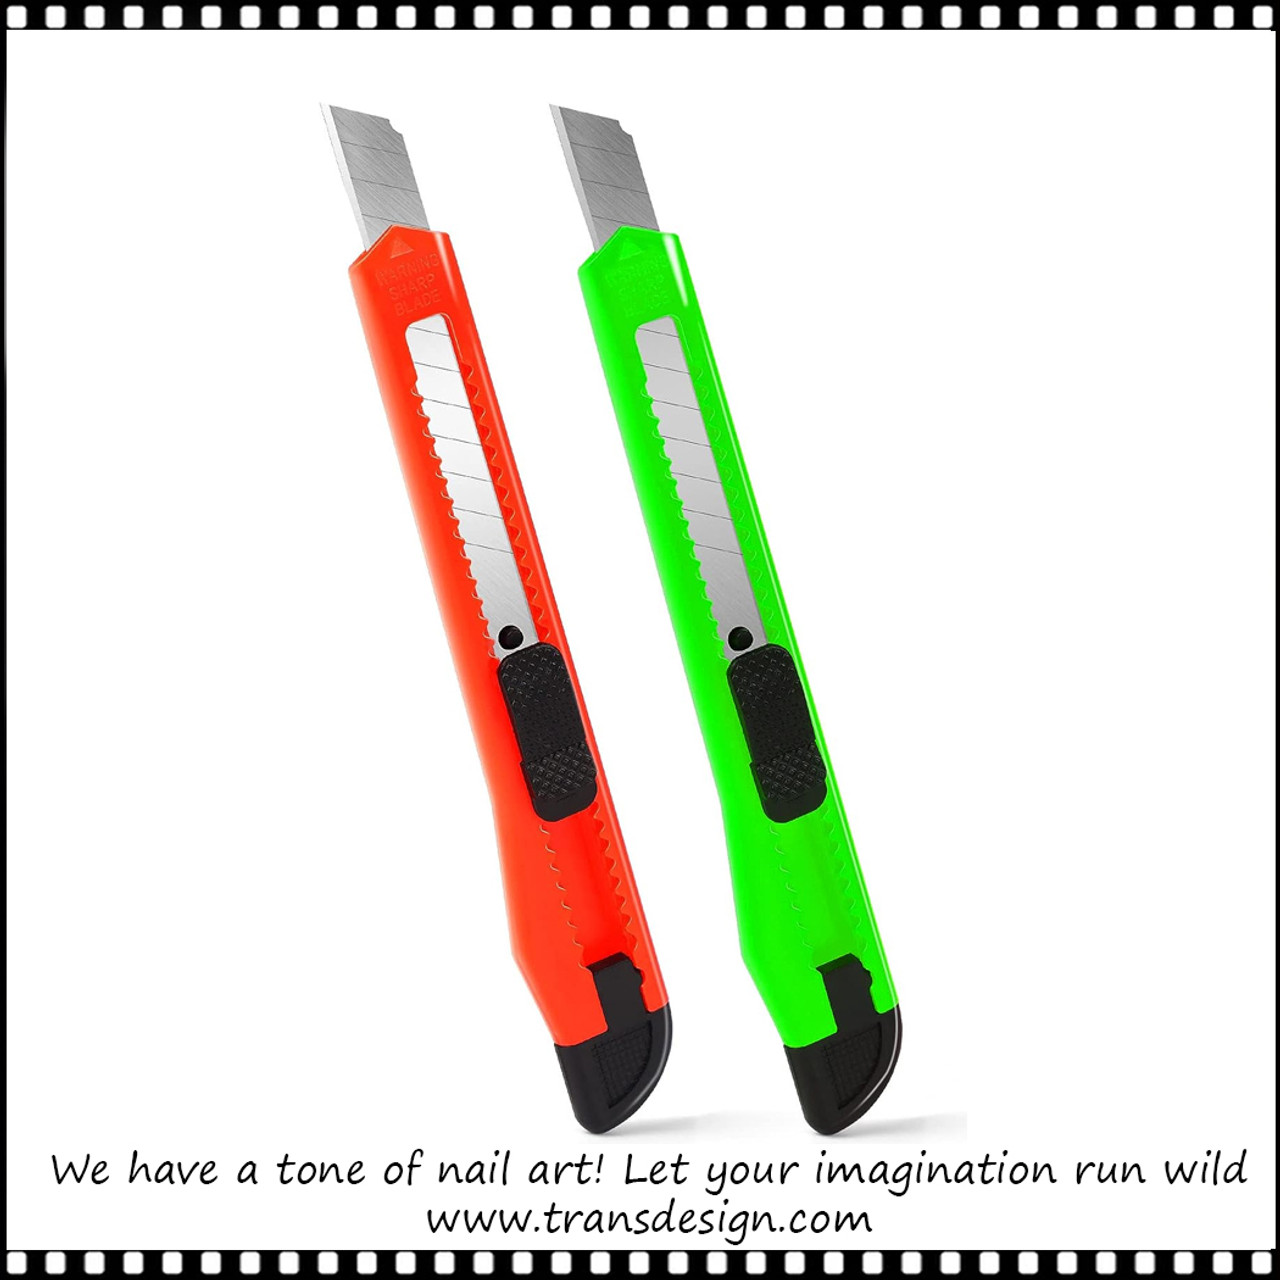 https://cdn11.bigcommerce.com/s-e4af5/images/stencil/1280x1280/products/52421/159672/16178_RETRACTABLE_CUTTER_Utility_Knife_With_Auto-Lock_Design_Red_Green_2_Pack__96305.1693344440.jpg?c=2